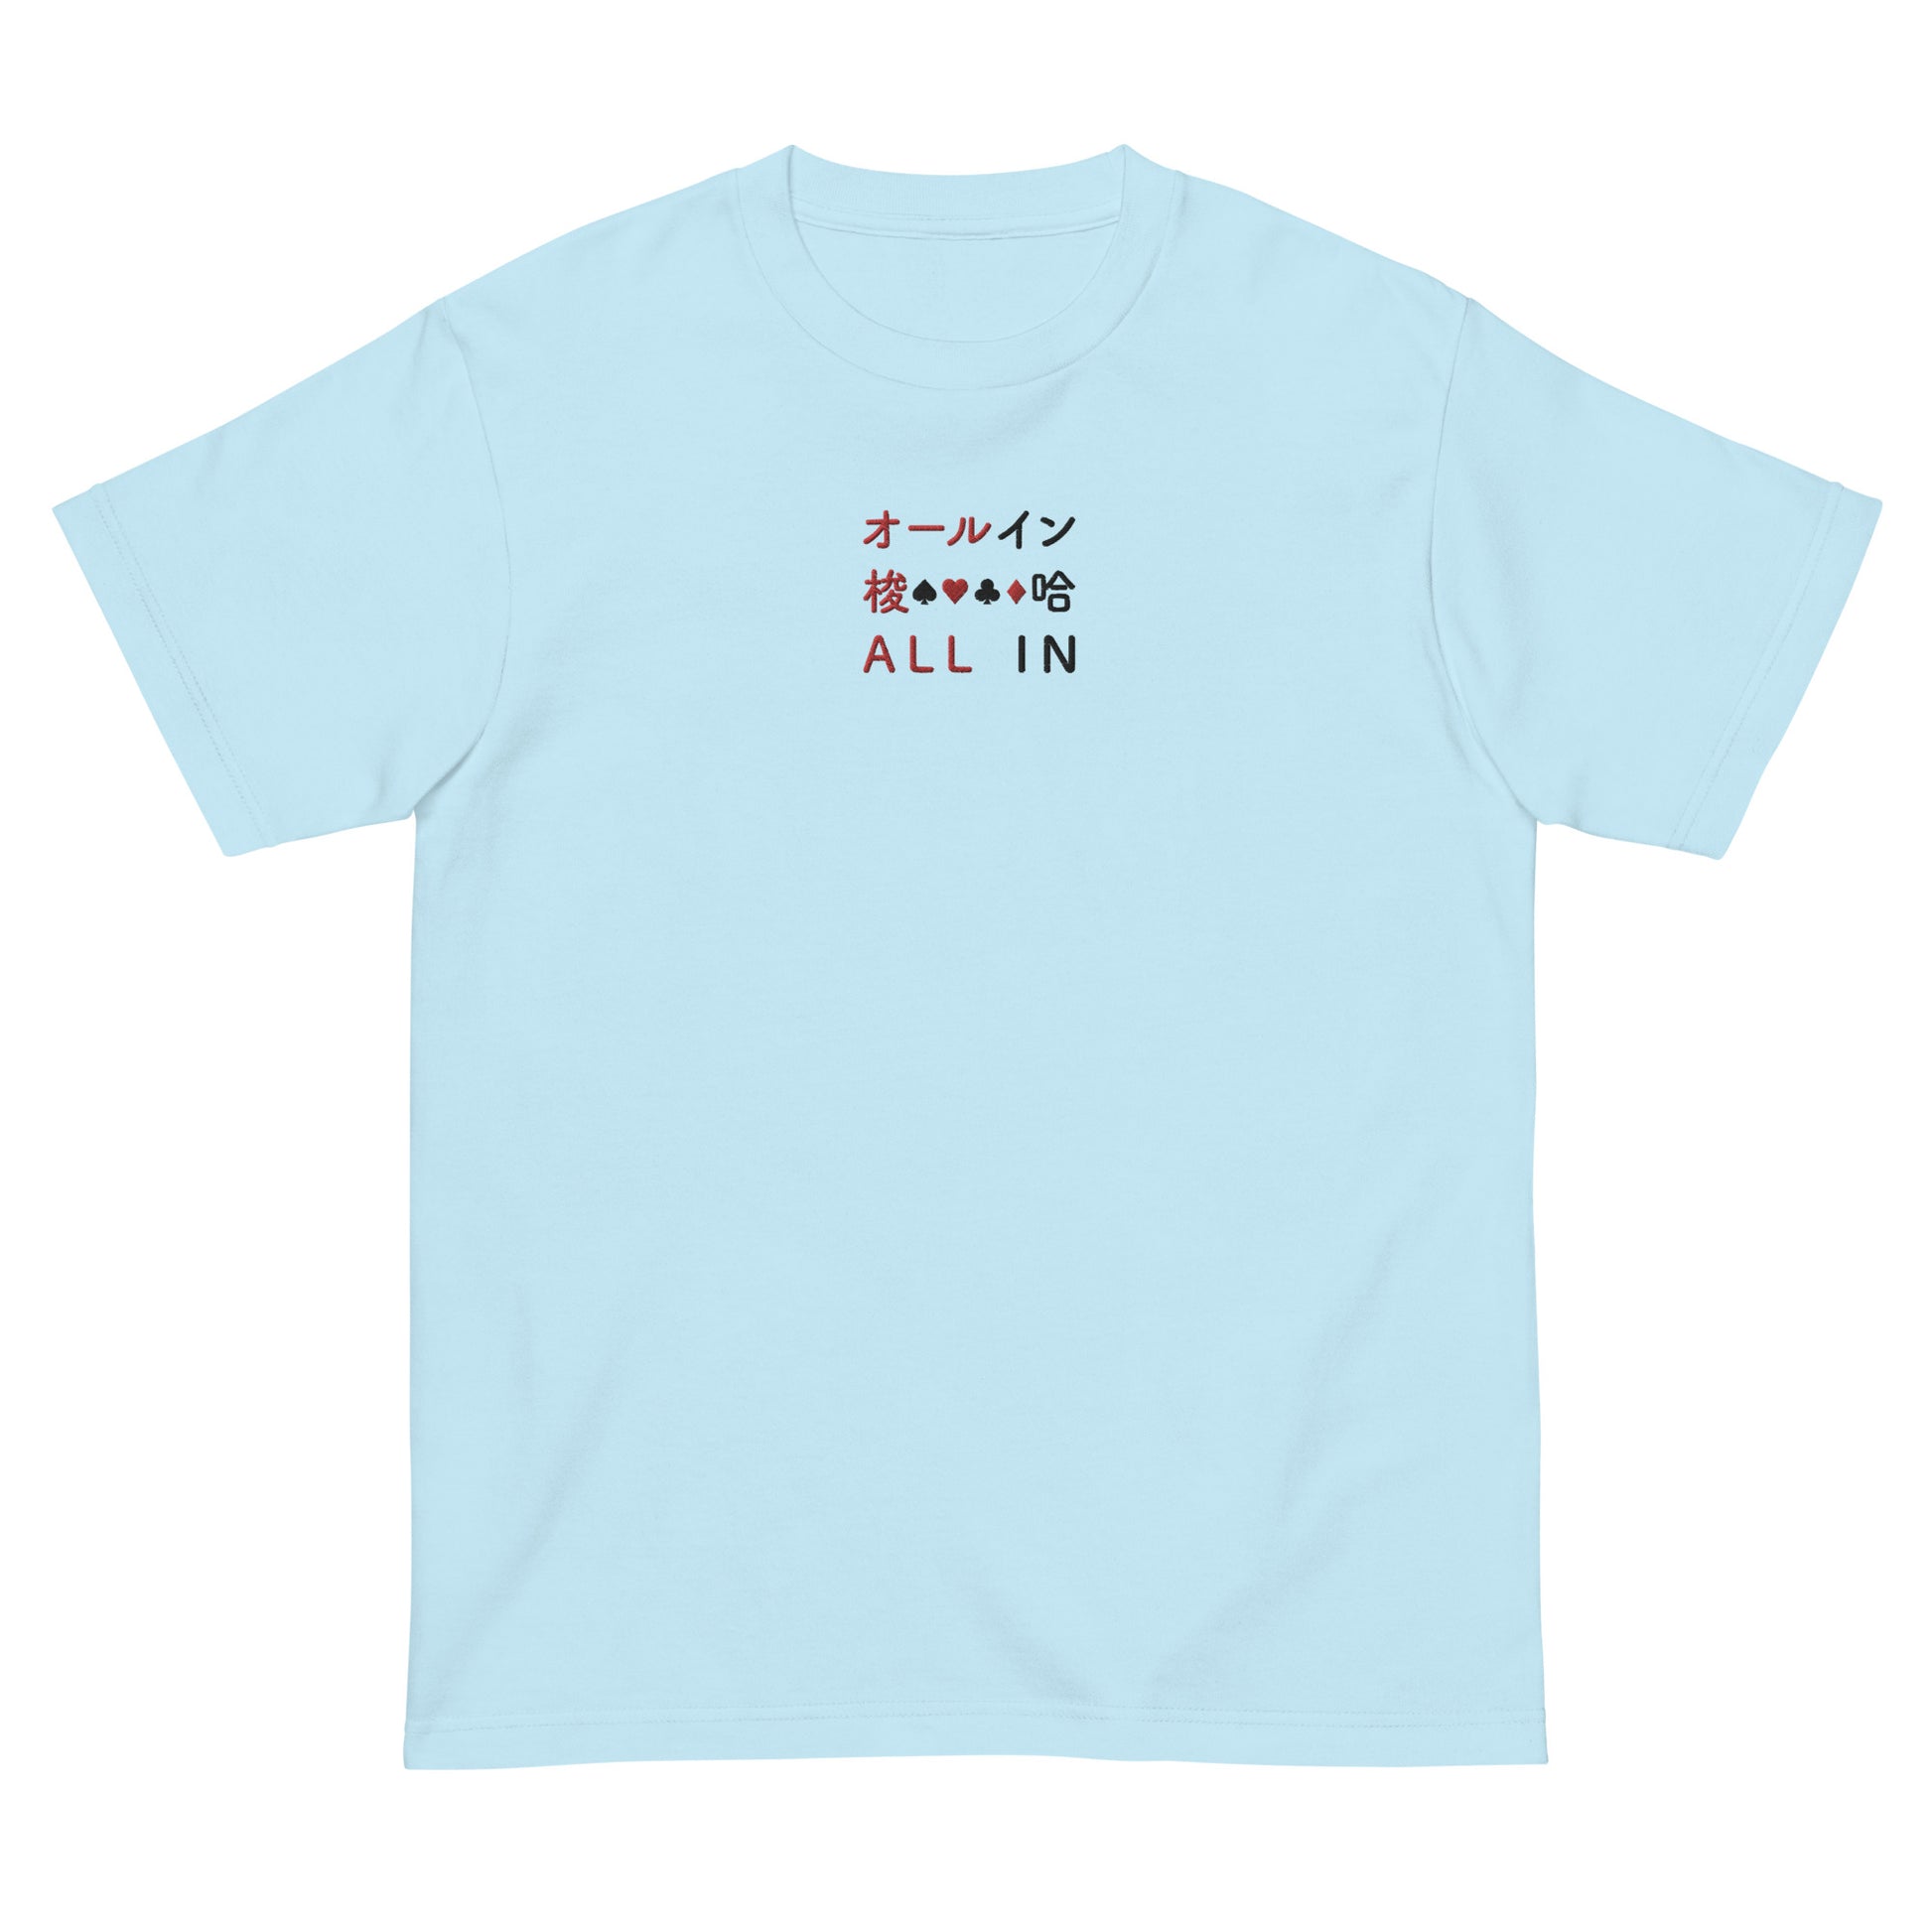 Light Blue High Quality Tee - Front Design with an Red, Black Embroidery "All IN" in Japanese,Chinese and English